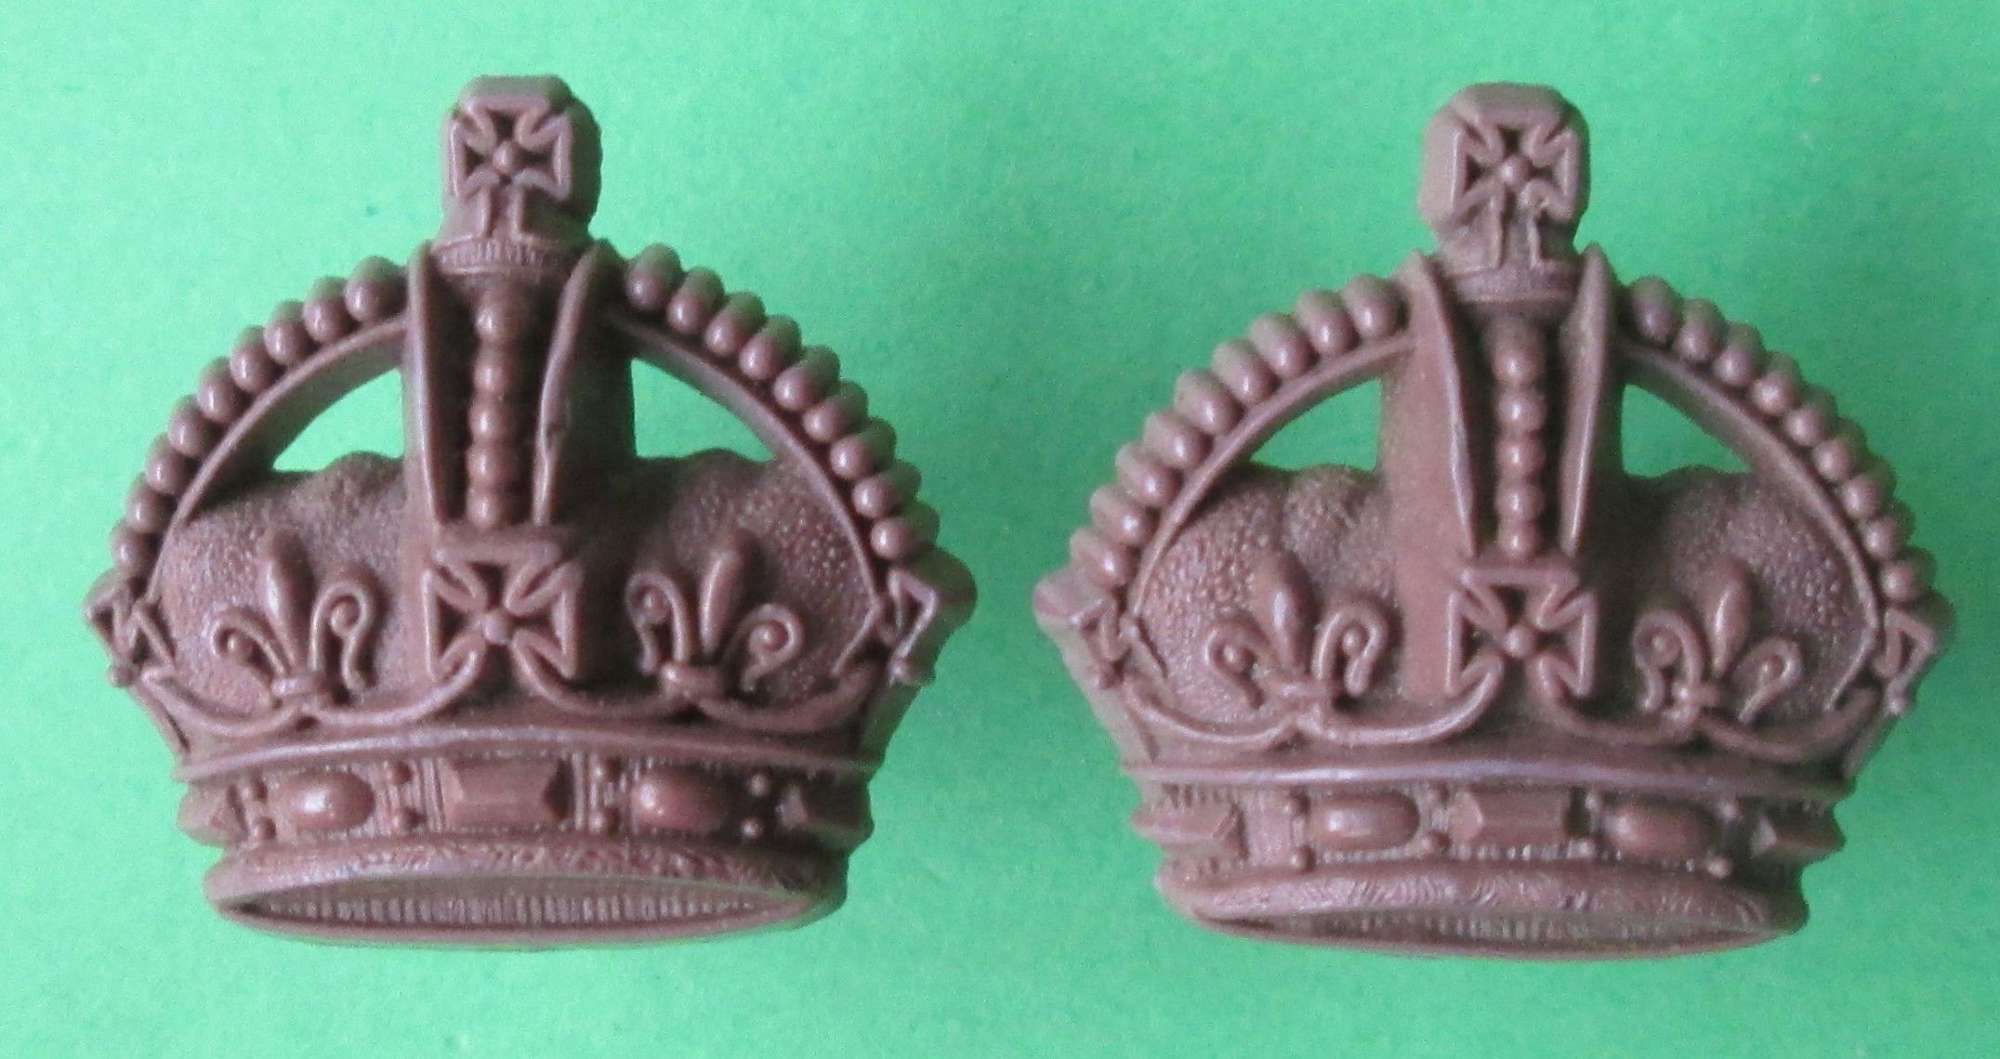 A WWII PAIR OF PLASTIC OFFICERS KINGS CROWNS